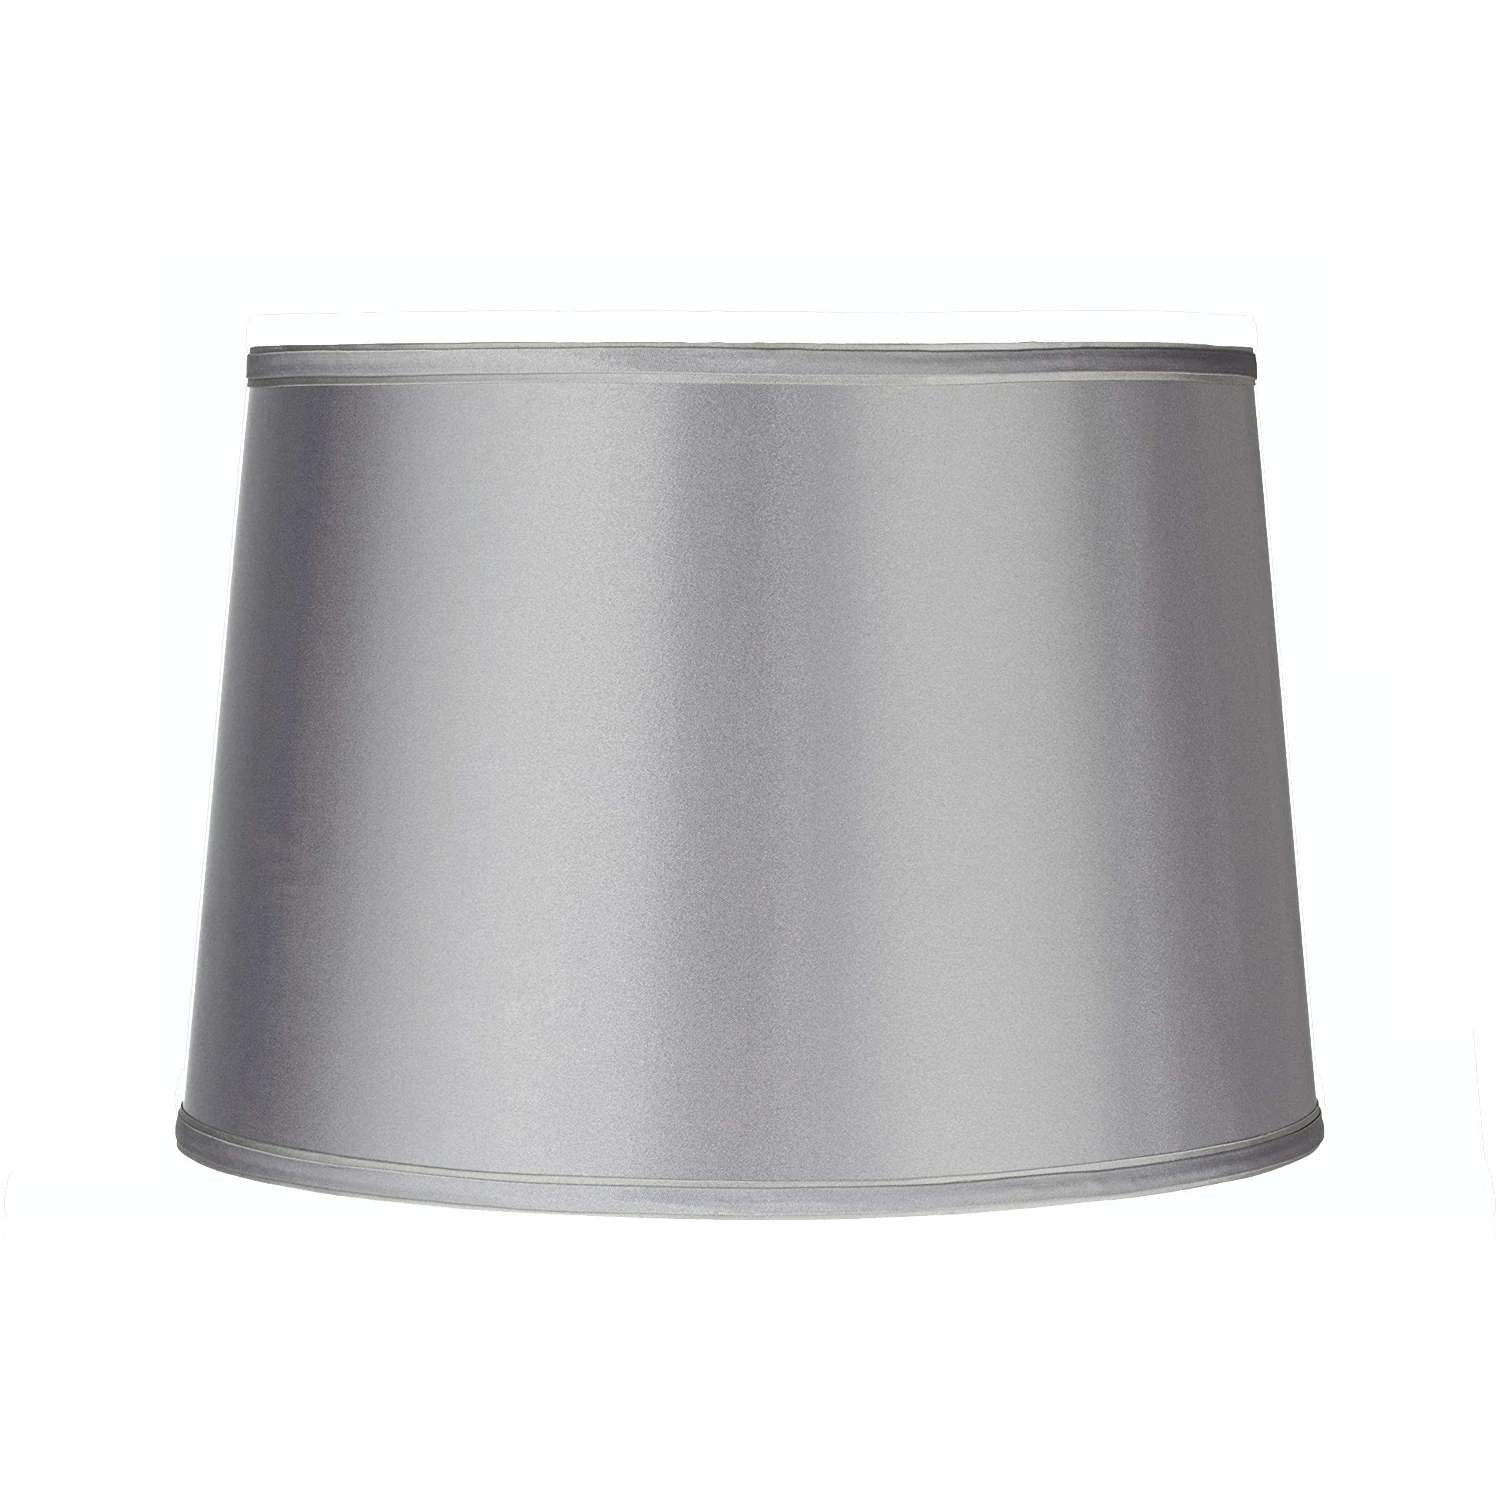 Custom Metal Spinning Lampshade Fram Cover Parts